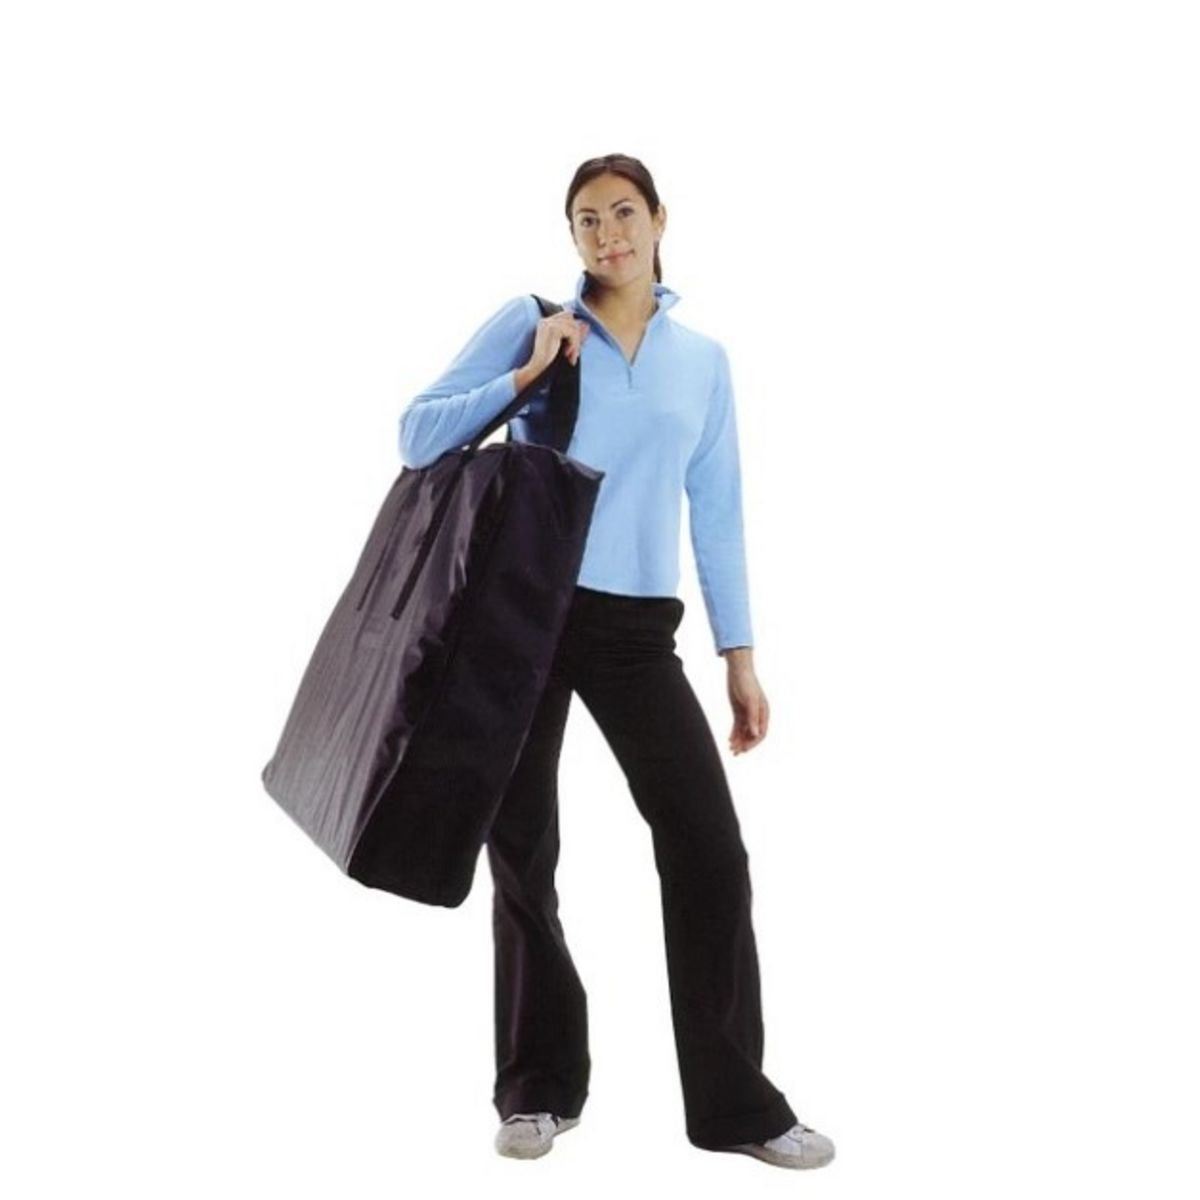 Lady holding carry bag including the Action promotional display counter parts..jpg